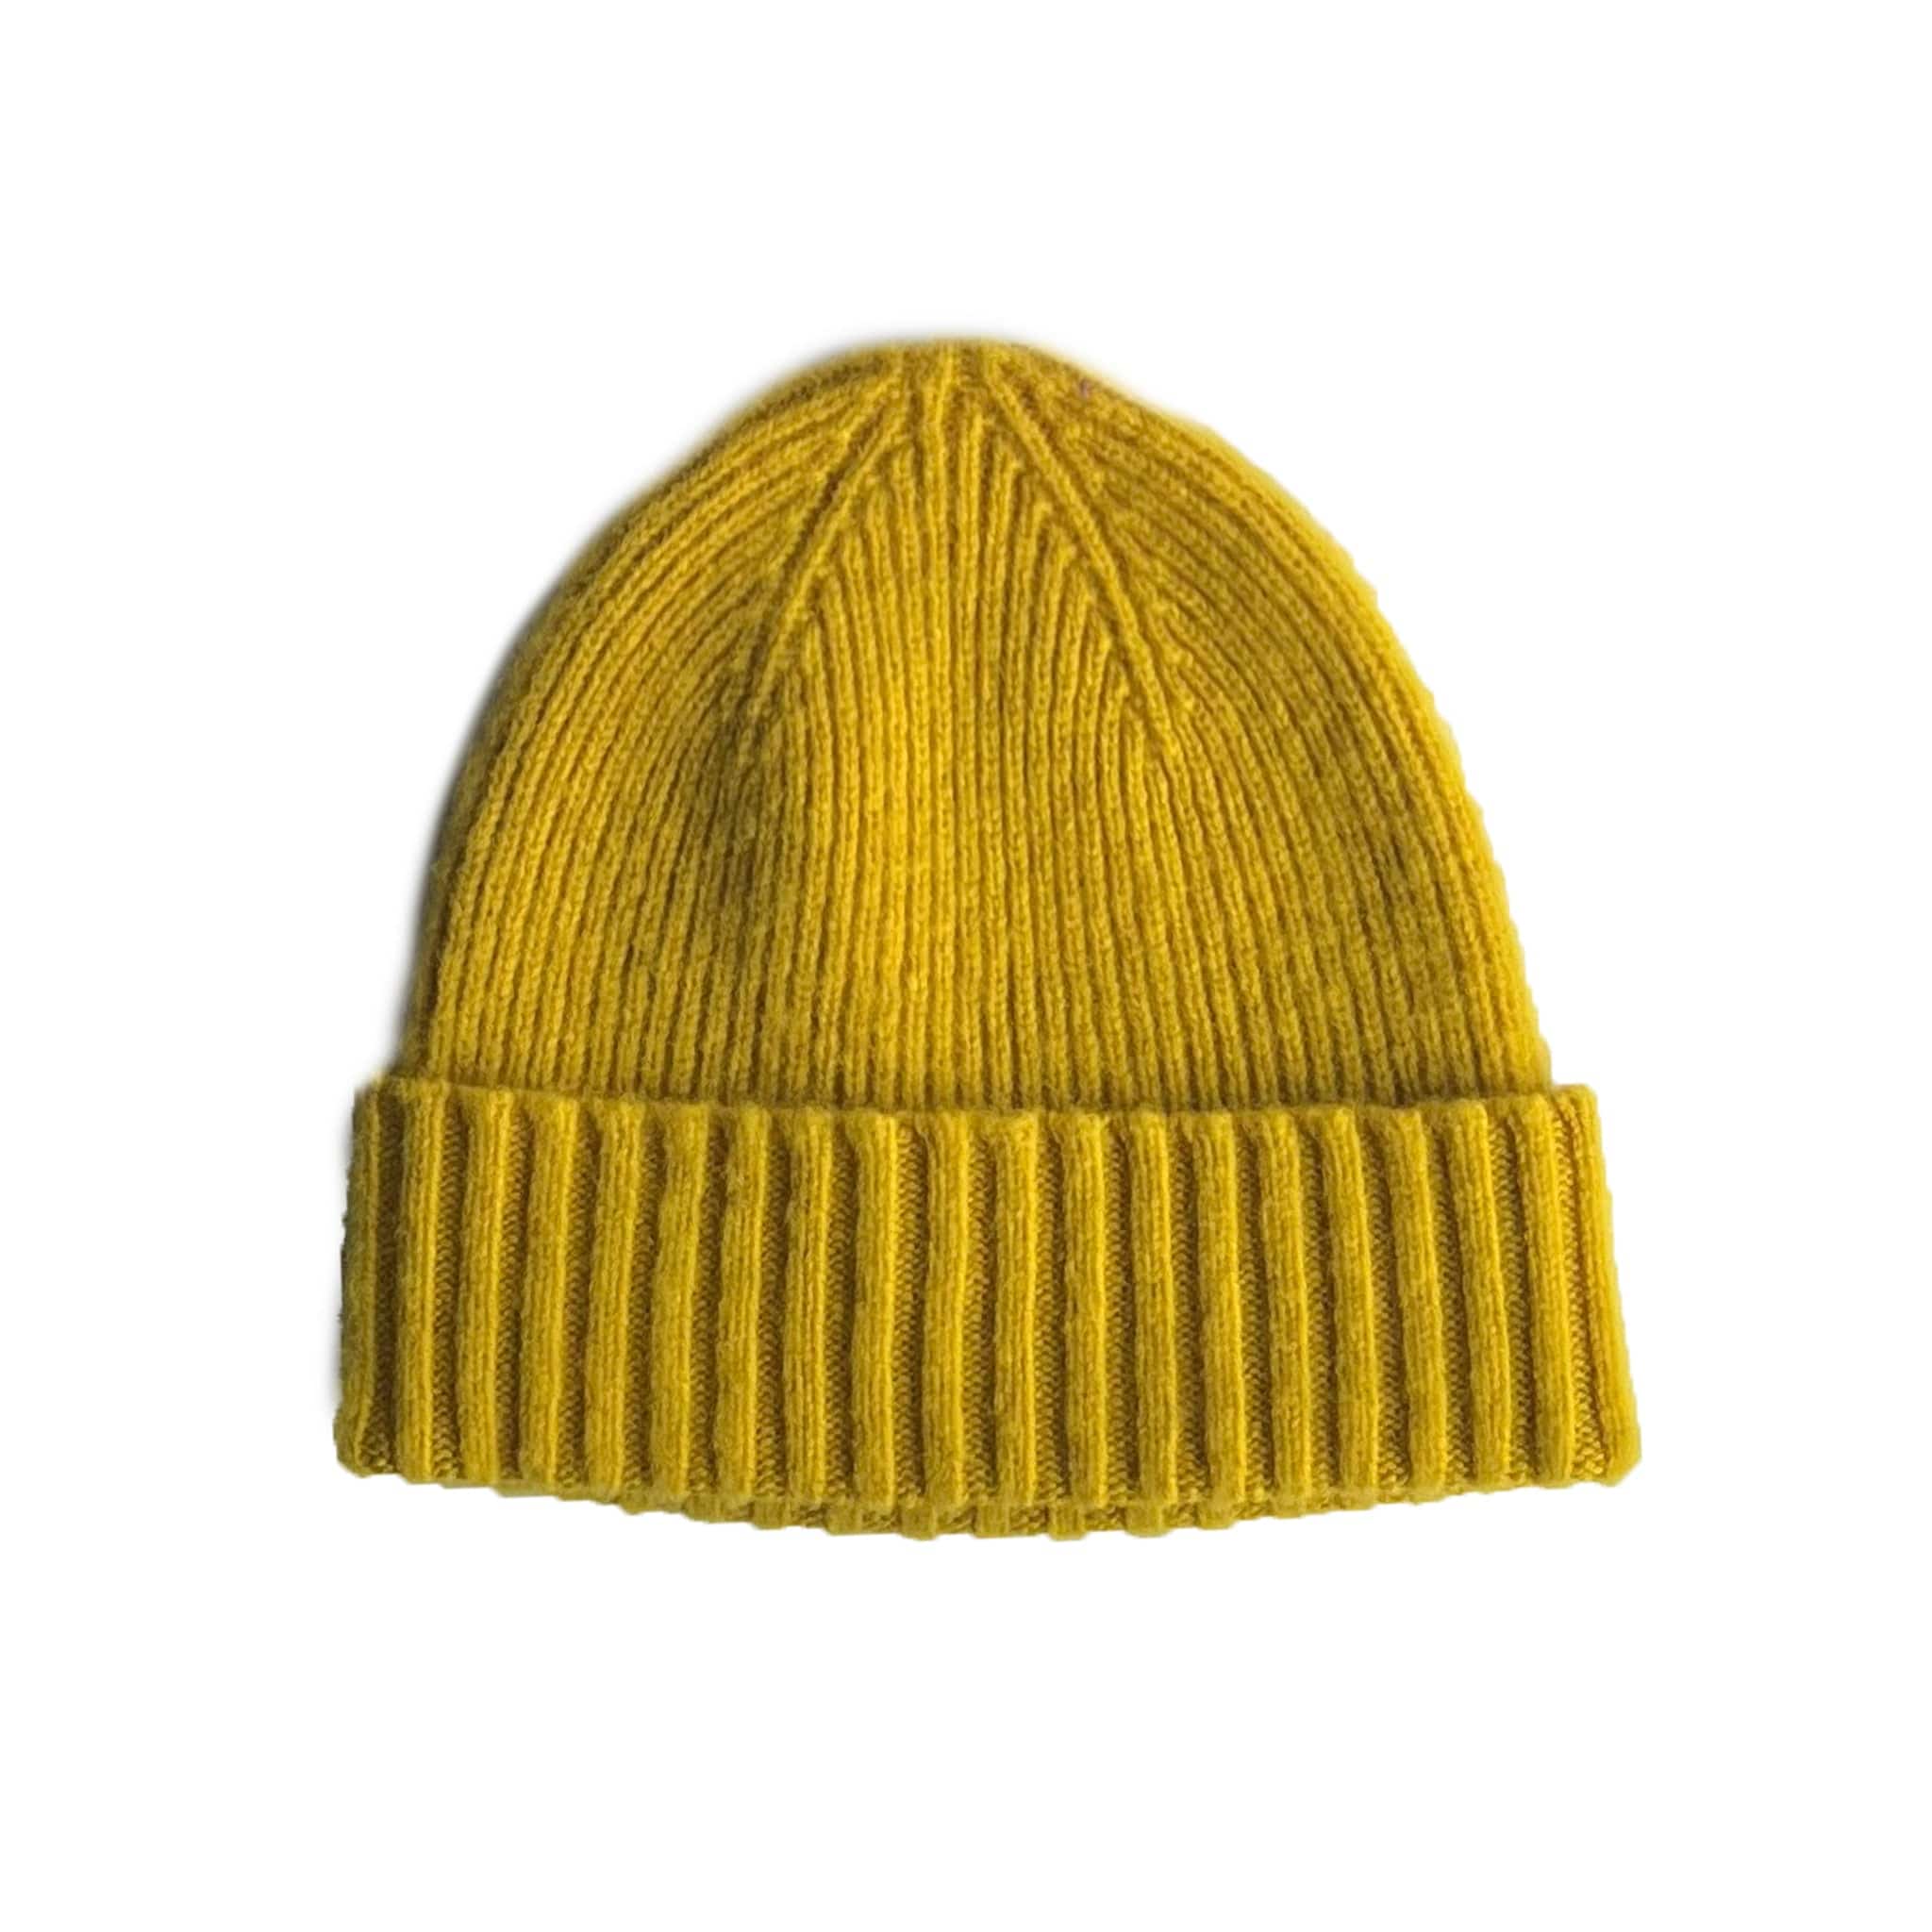 Quinton & Chadwick Brushed Beanie Picalilli